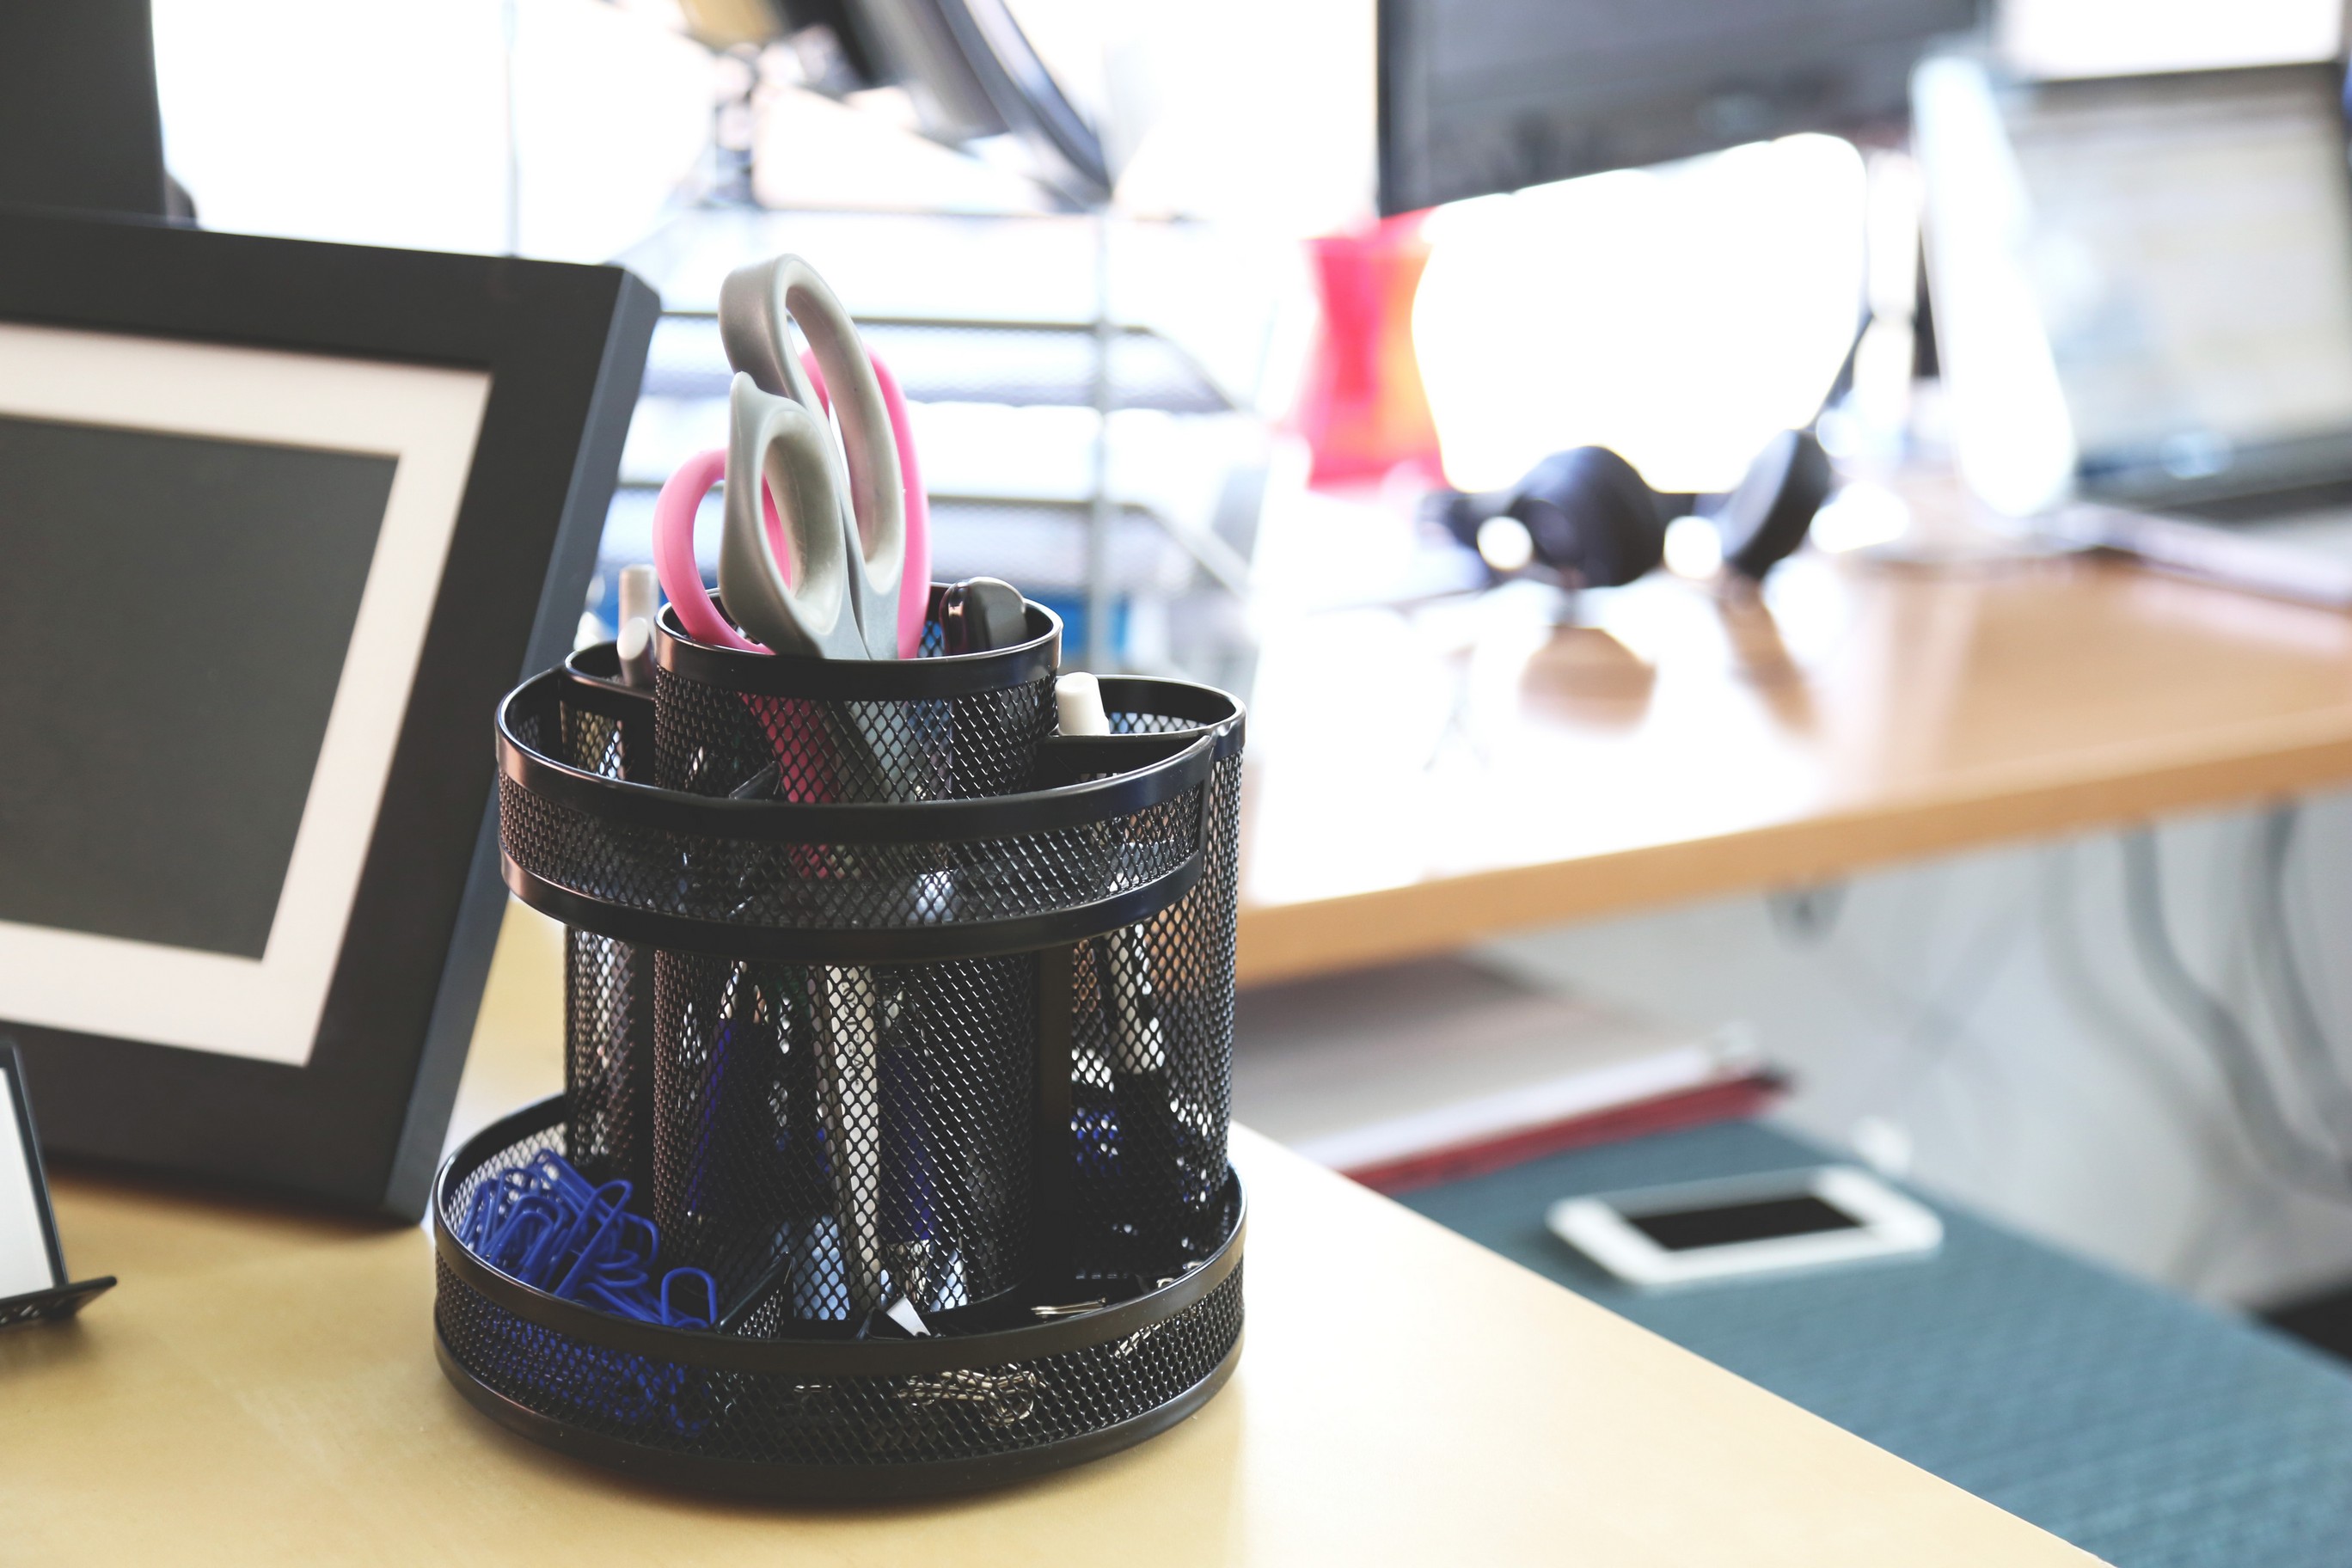 A round mesh container holding scissors, markers and paperclips is sitting on an office desk